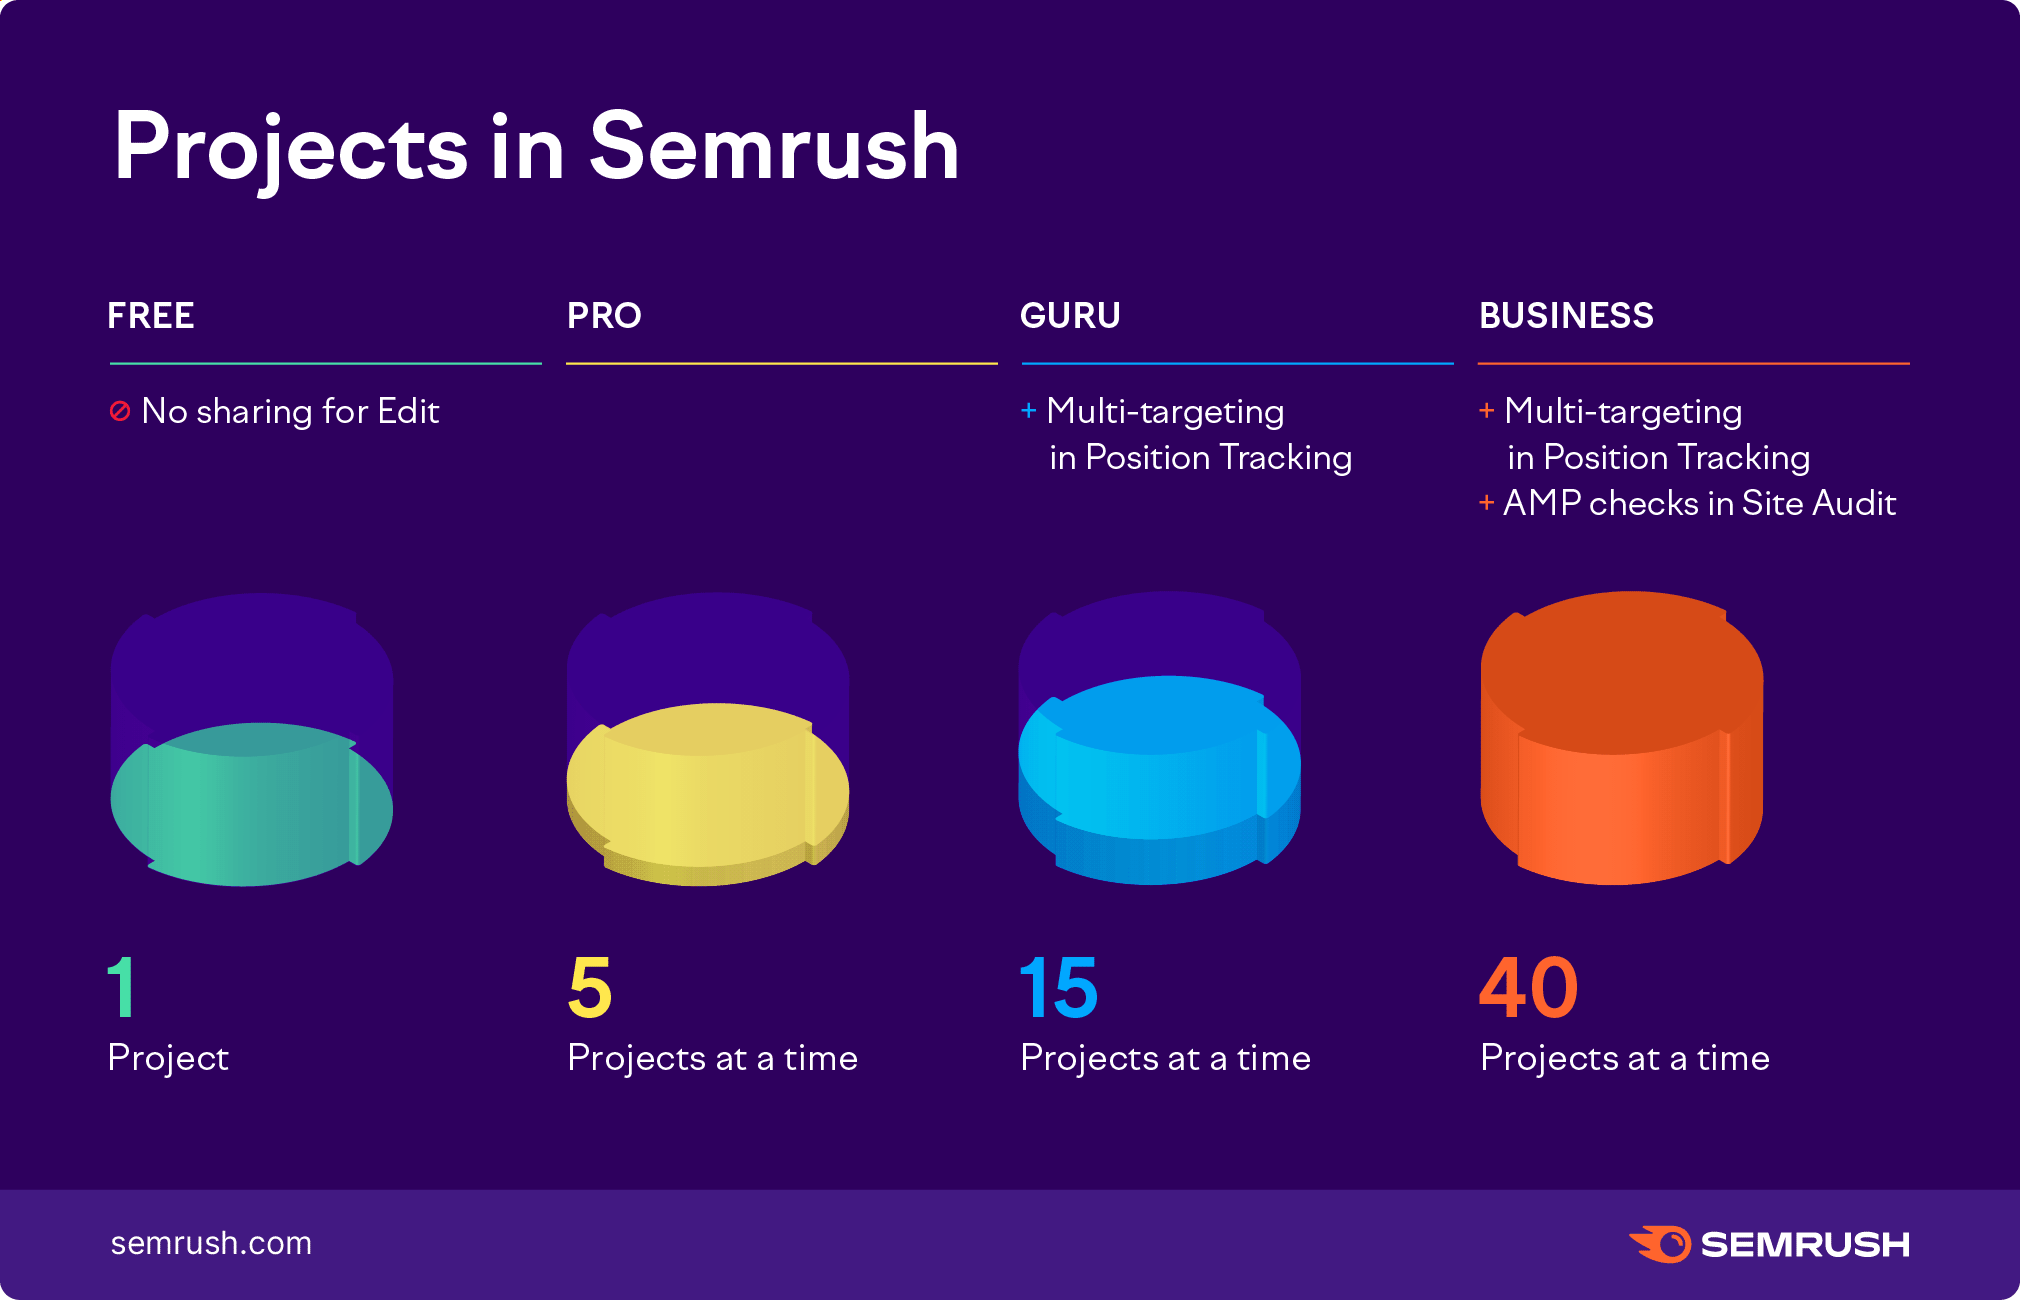 Project limits in Semrush. Free plan: No sharing for edit, 1 Project. Pro plan: 5 Projects at a time. Guru plan: multi-targeting in Position Tracking, 15 Projects at a time. Business plan: multi-targeting in Position Tracking, AMP checks in Site Audit, 40 Projects at a time.